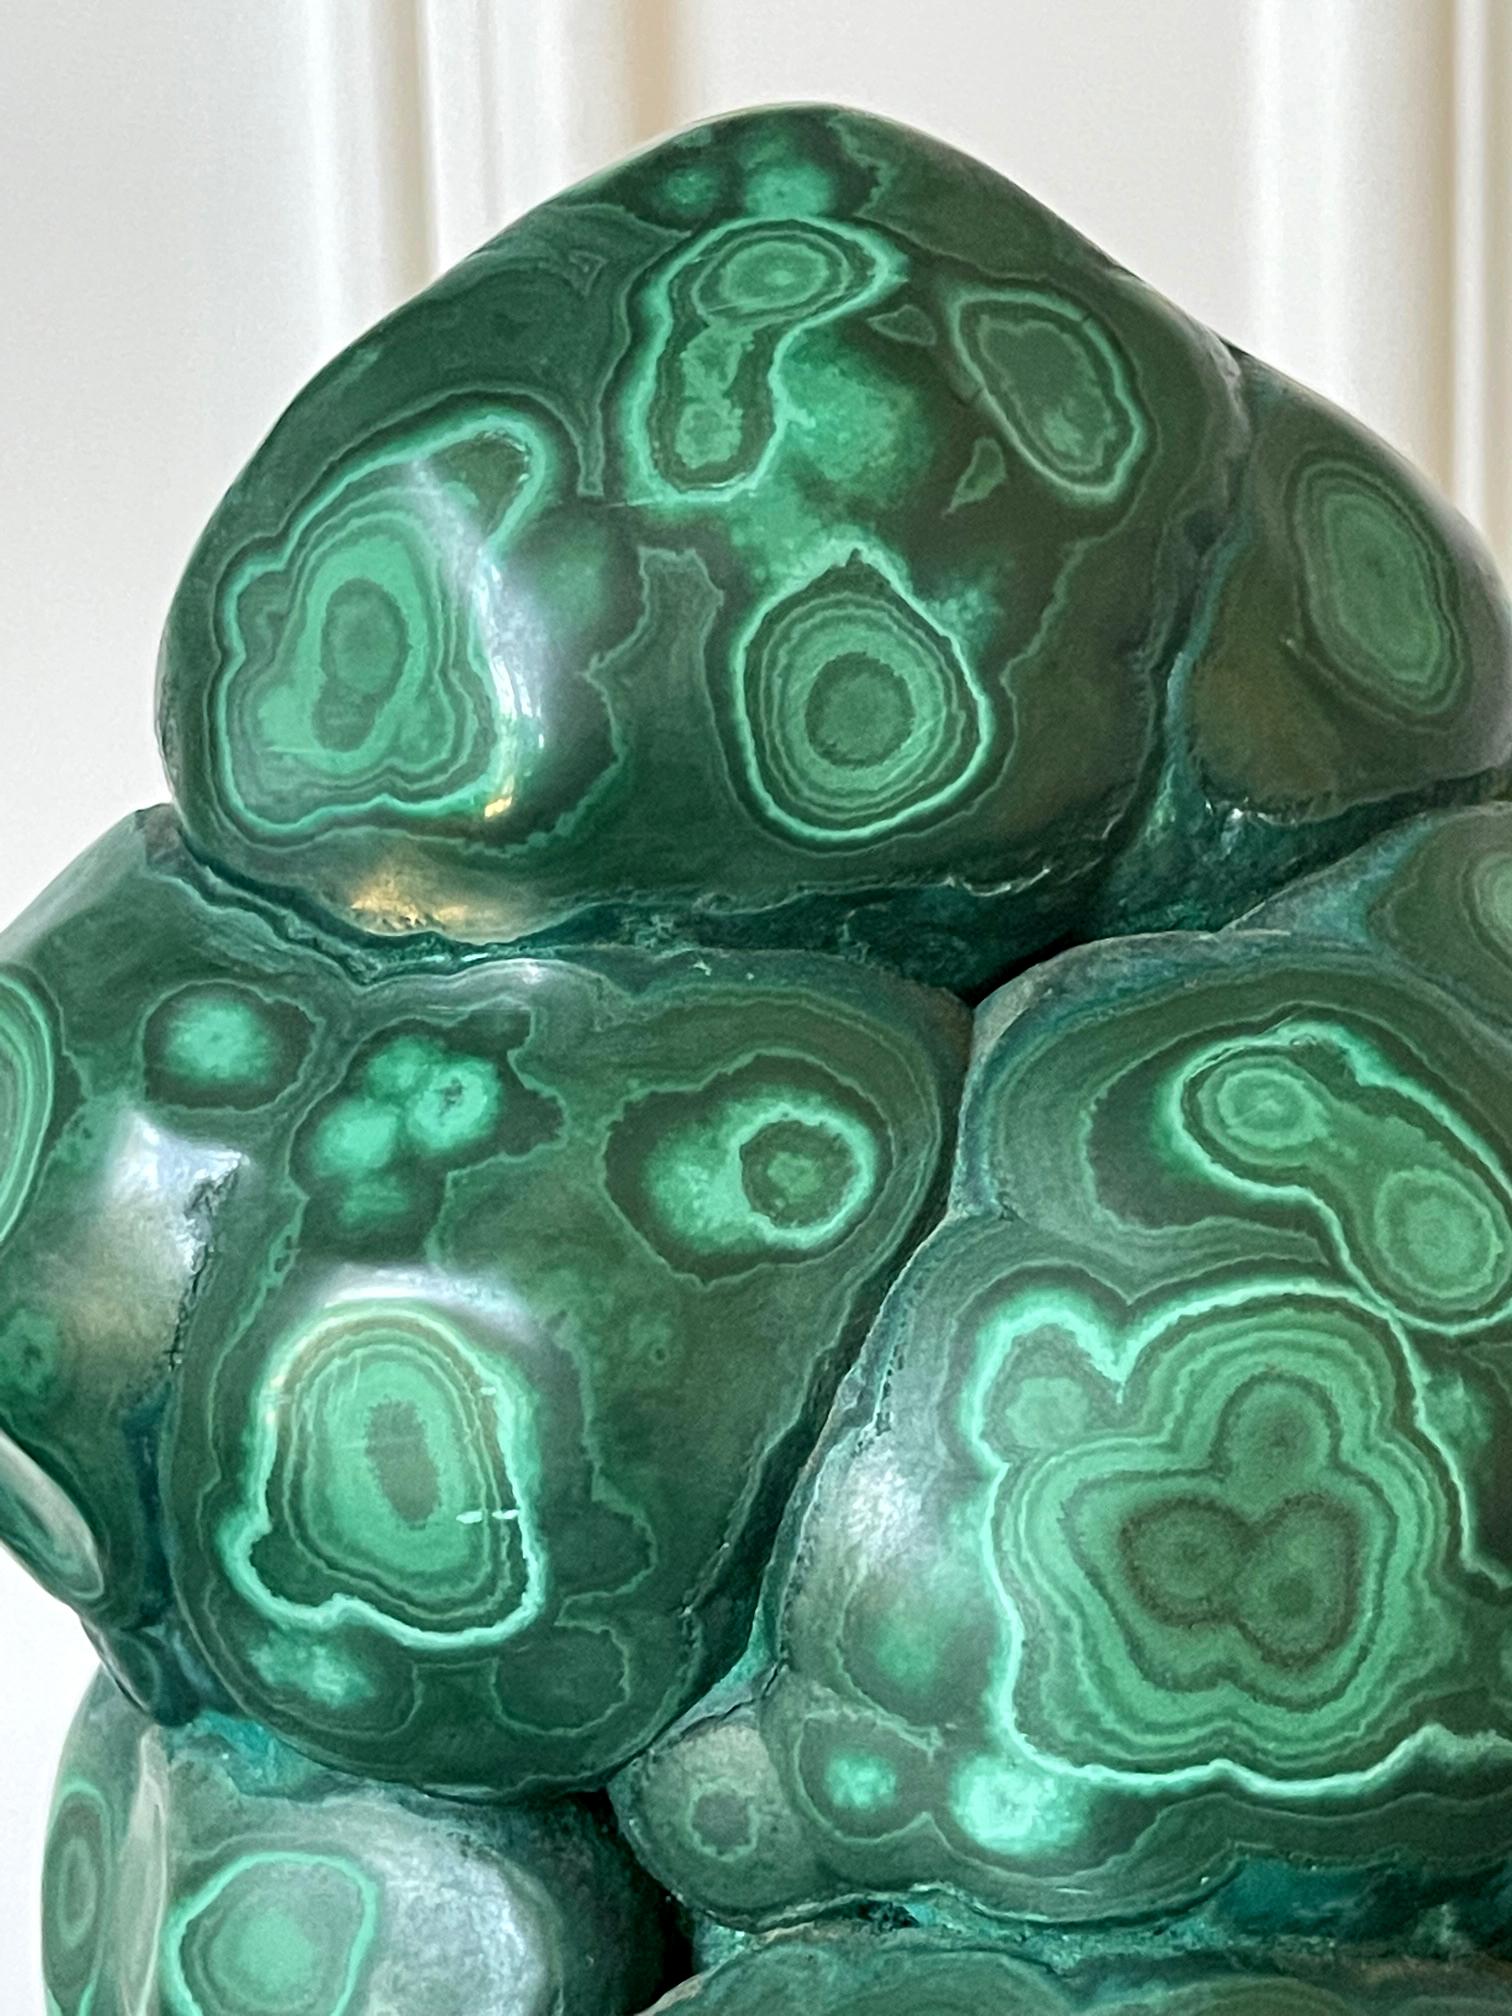 Malachite Rock on Display Stand as a Chinese Scholar Stone 5